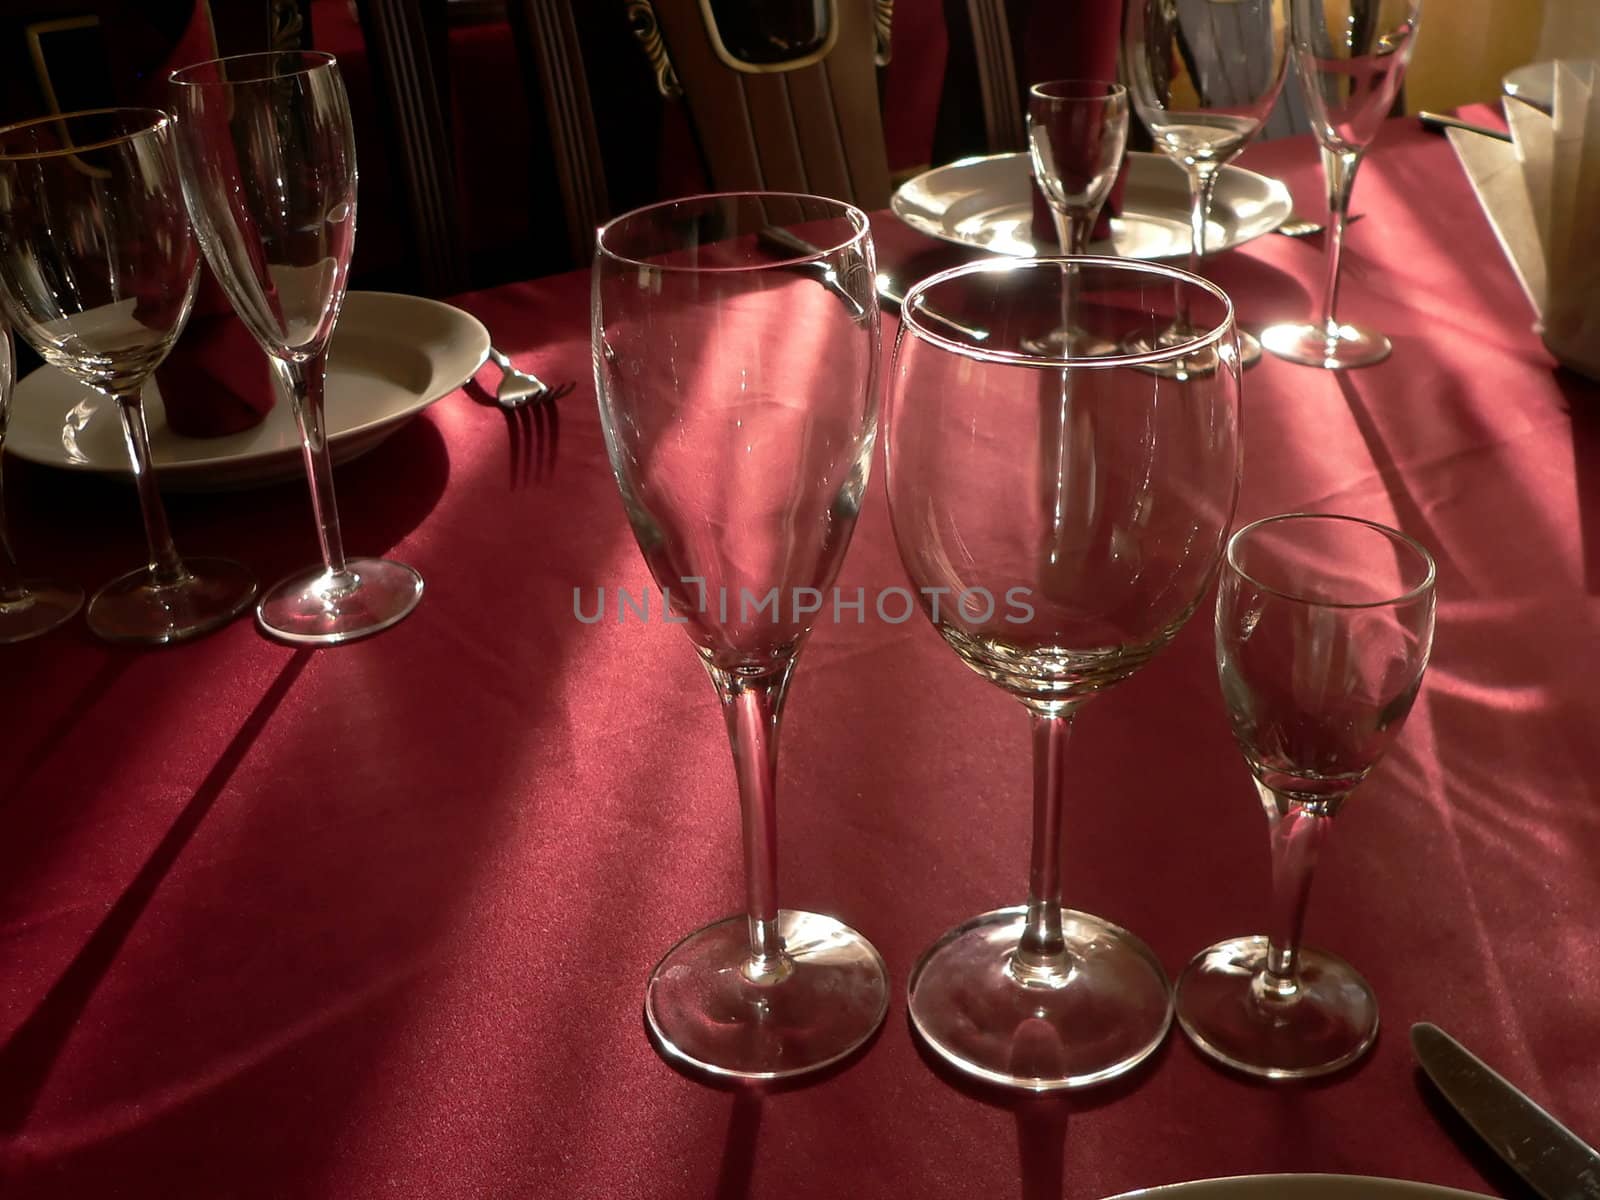 Wineglasses on purple tablecloth. To lay the table.